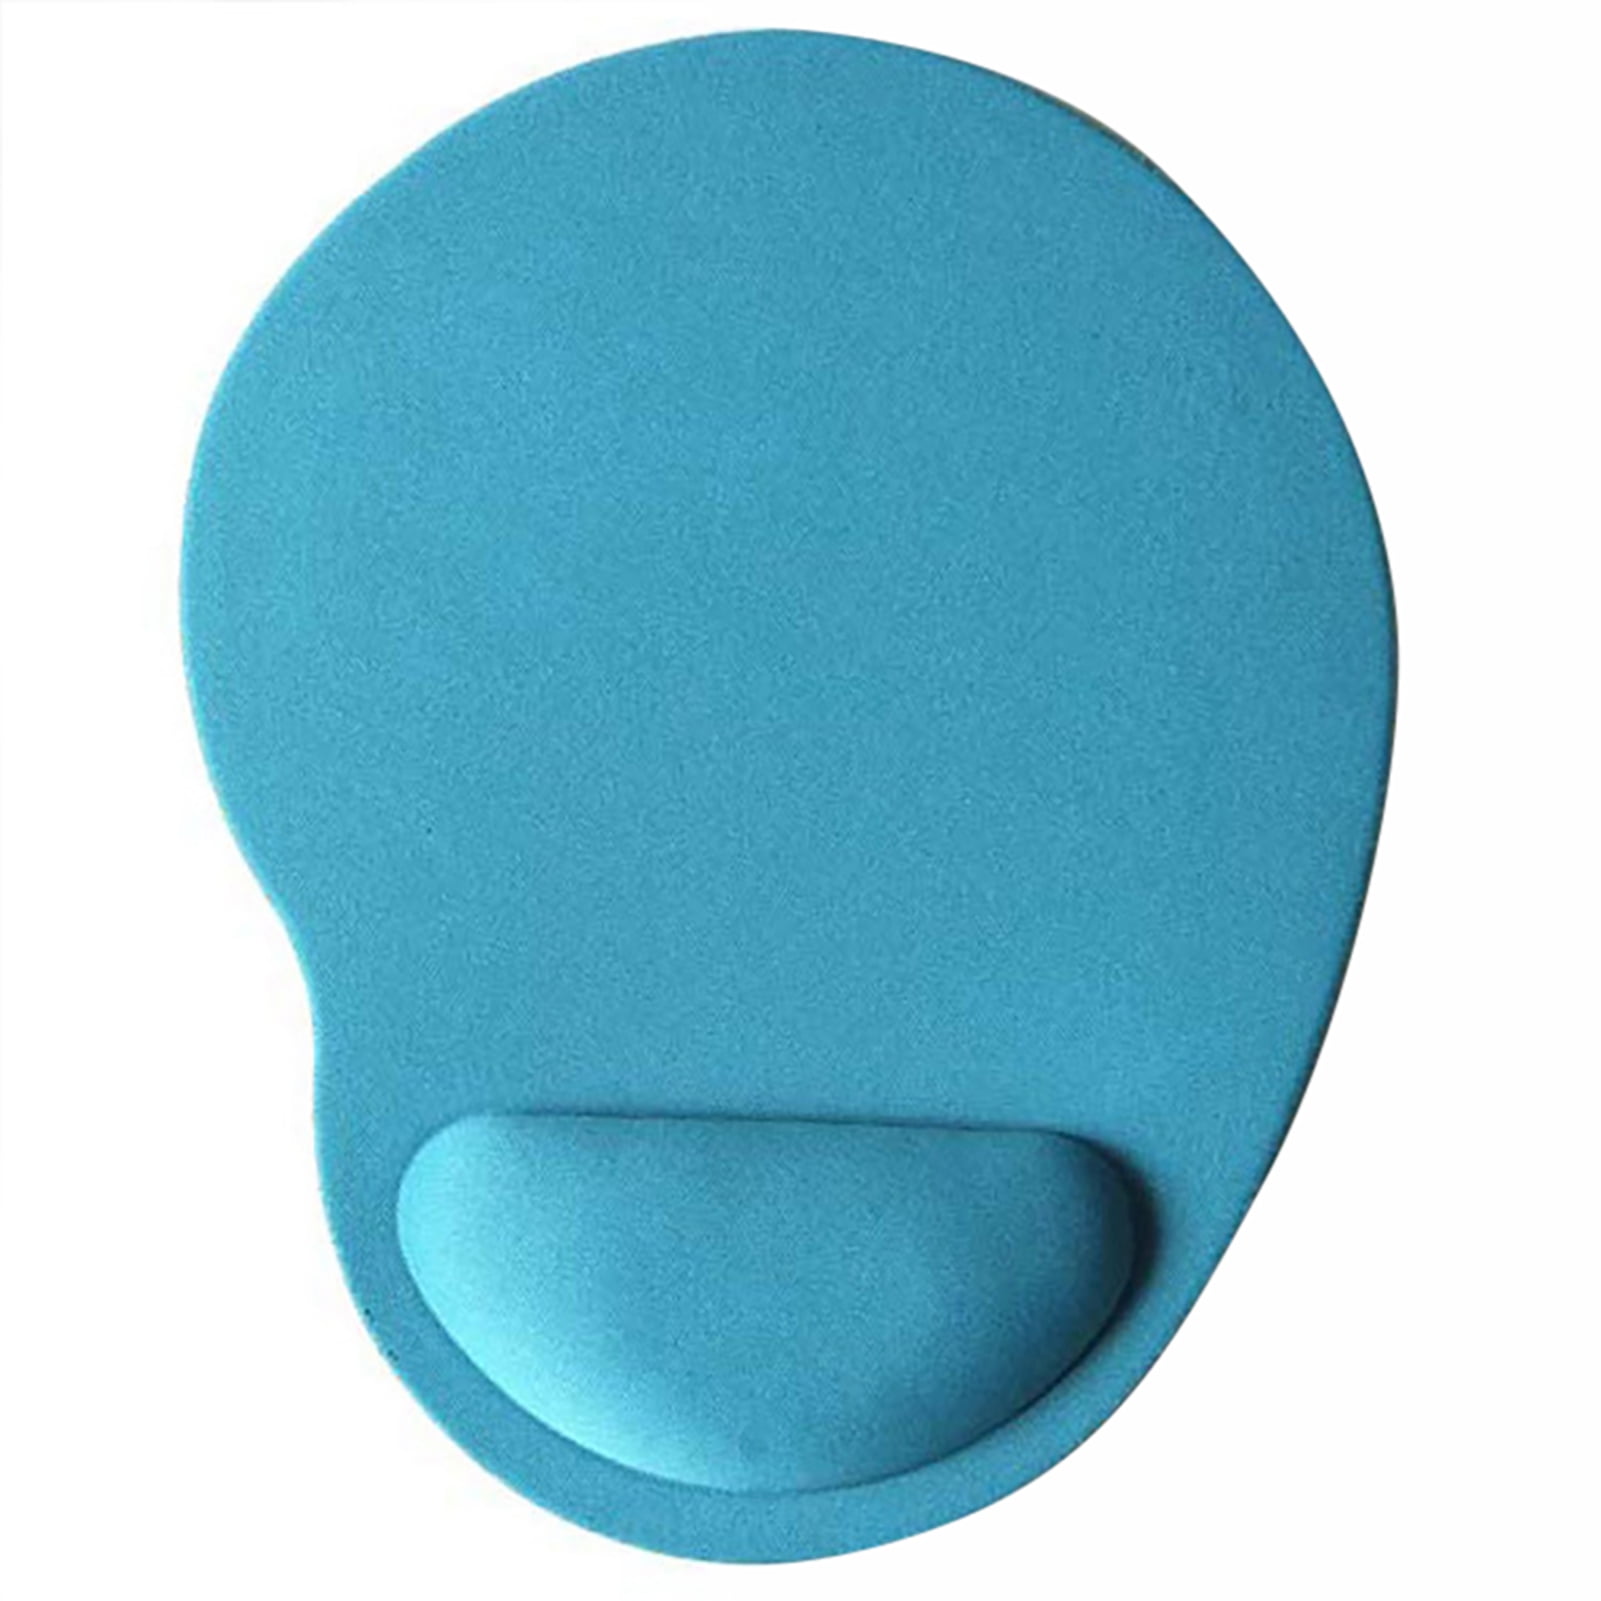 Walbest Ergonomic Mouse Pad with Wrist Rest Support, Anti-Slip Soft Sponge Gaming Mousepad Cushion for Computer, Laptop, Office, Comfortable Memory